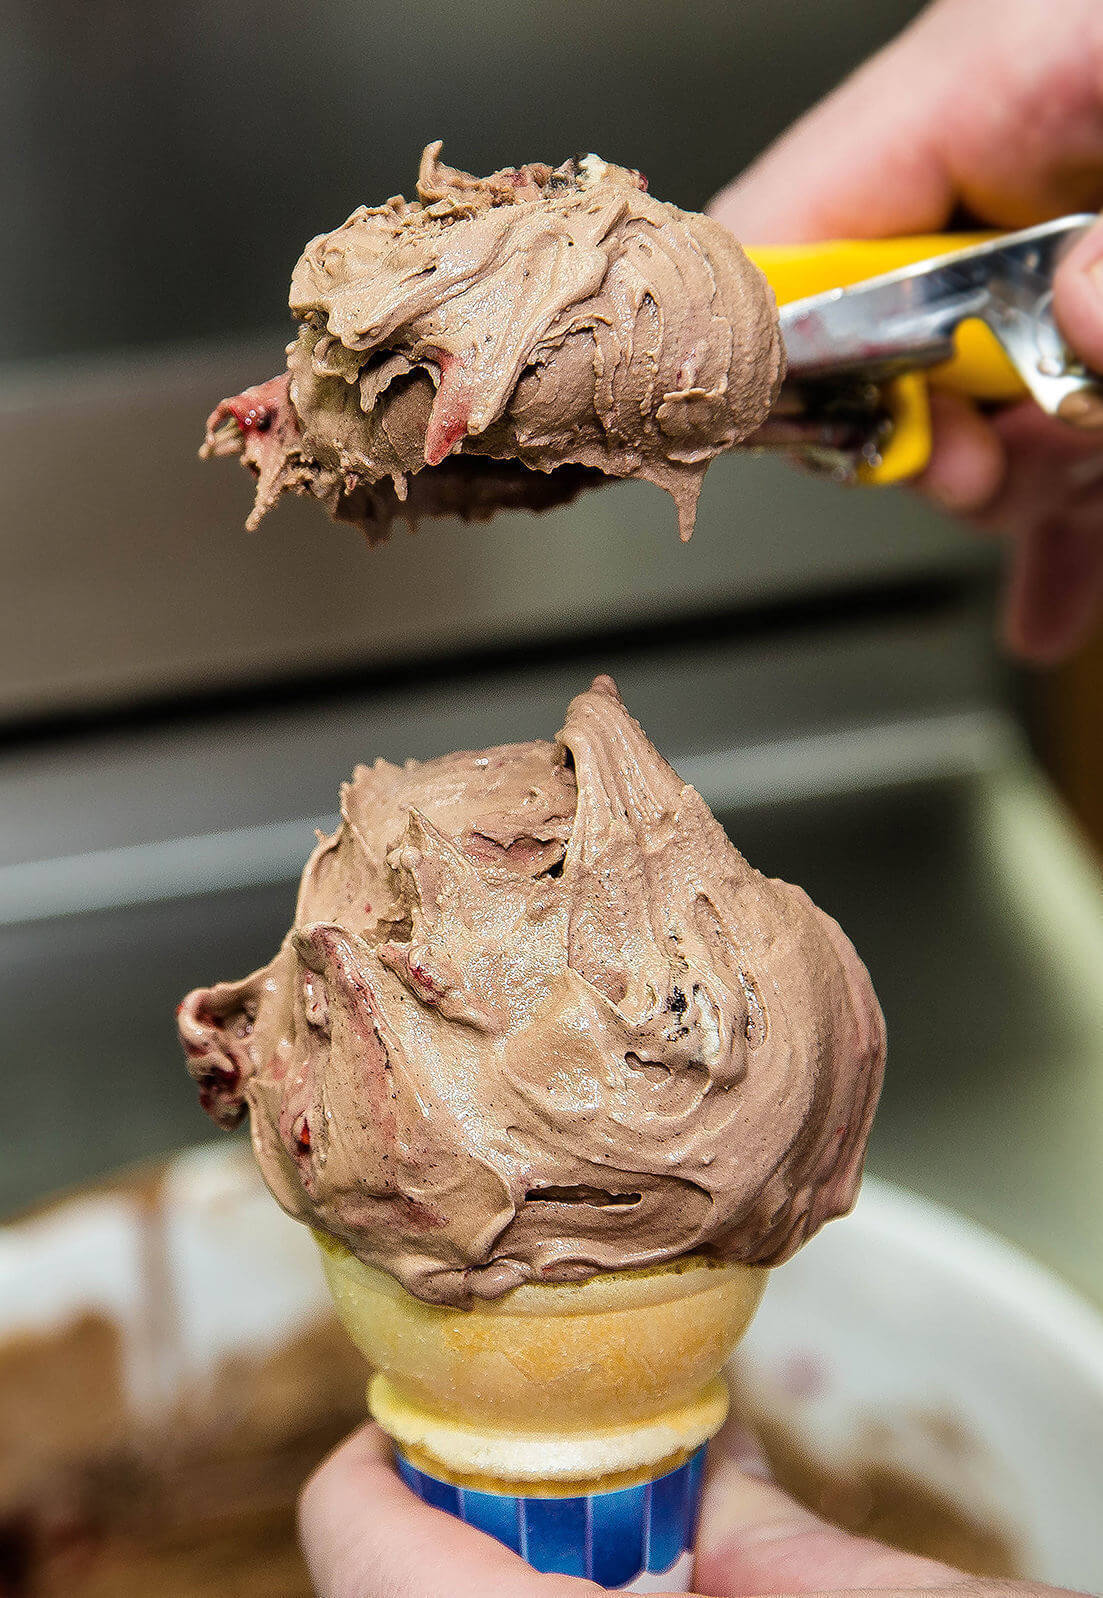 Chocolate Ice Cream photographed by iNET 